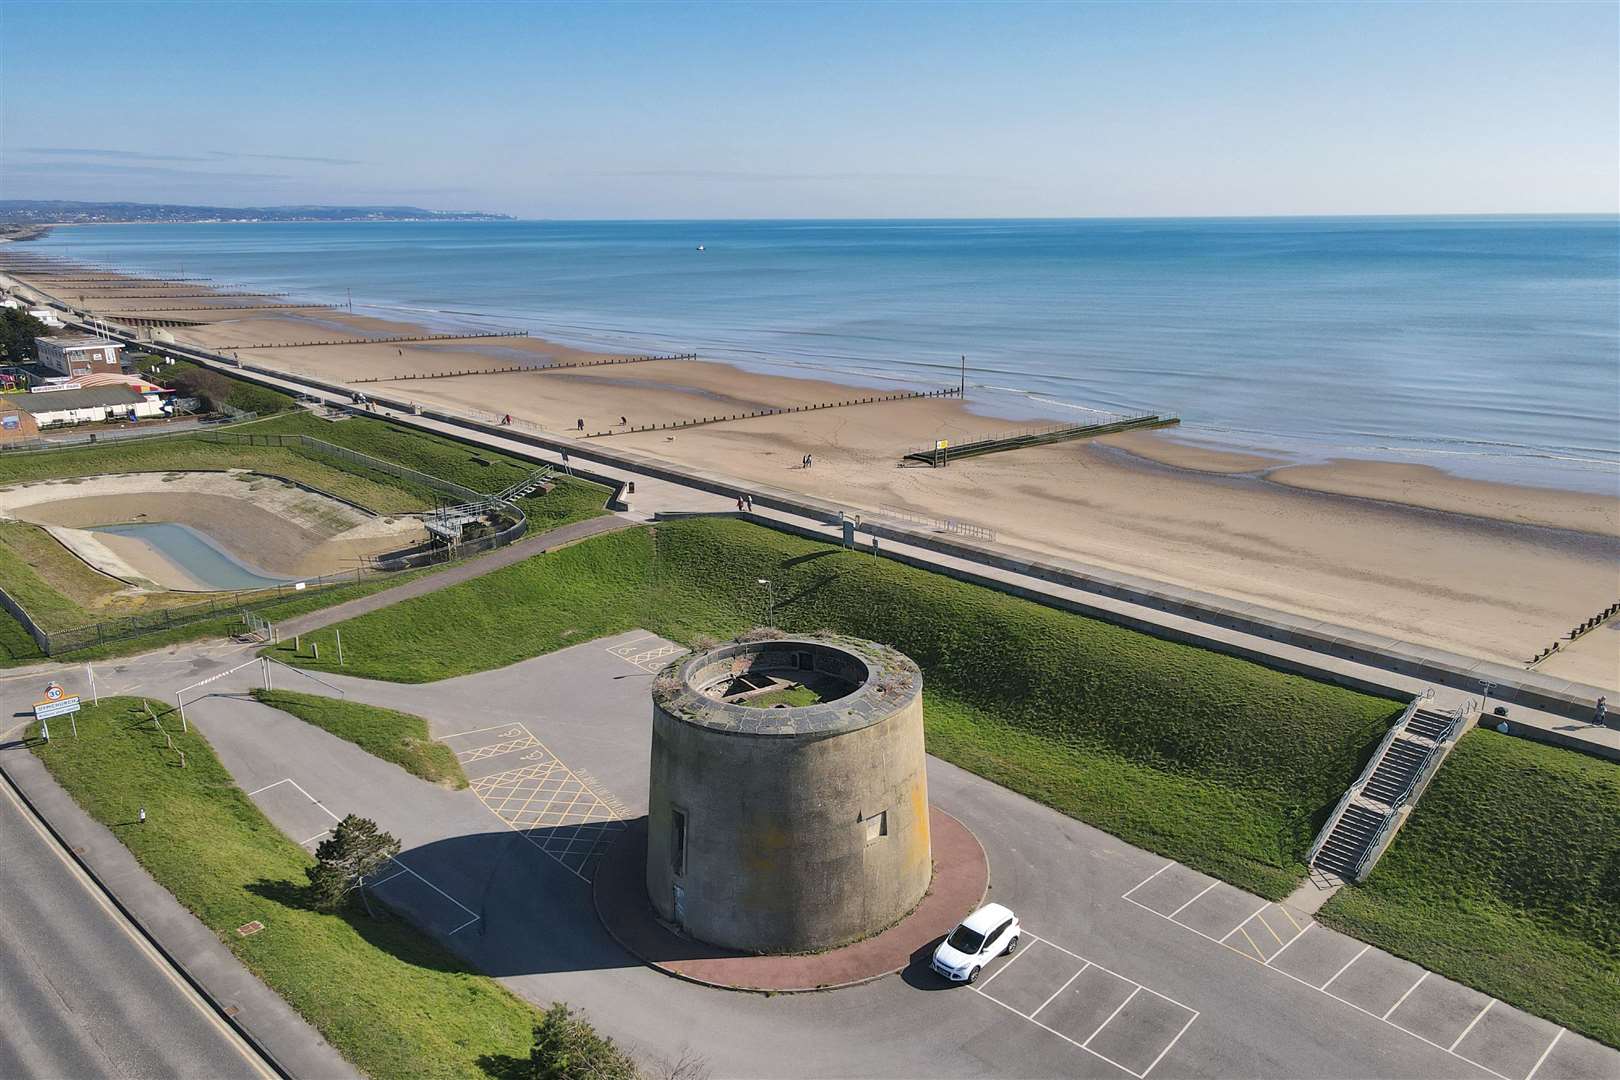 Martello Tower No. 25 is on the market. Picture: Savills